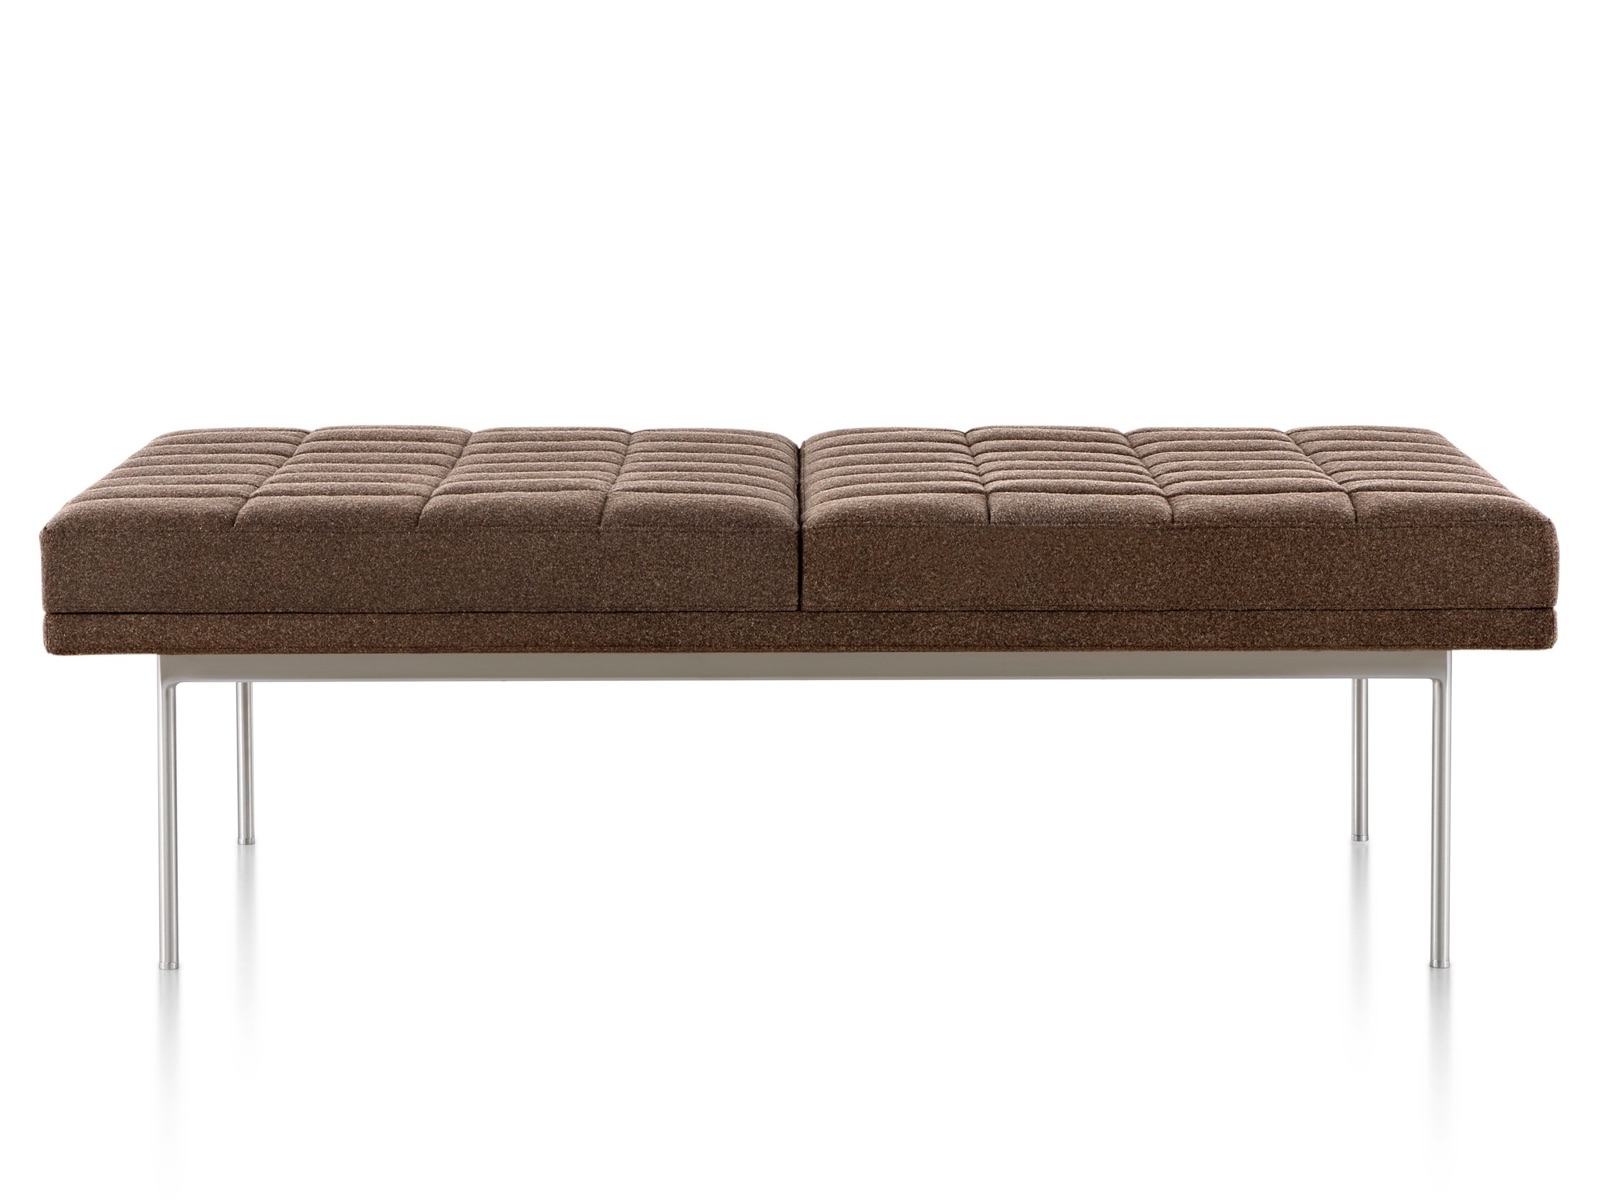 Side view of a brown Tuxedo Bench.